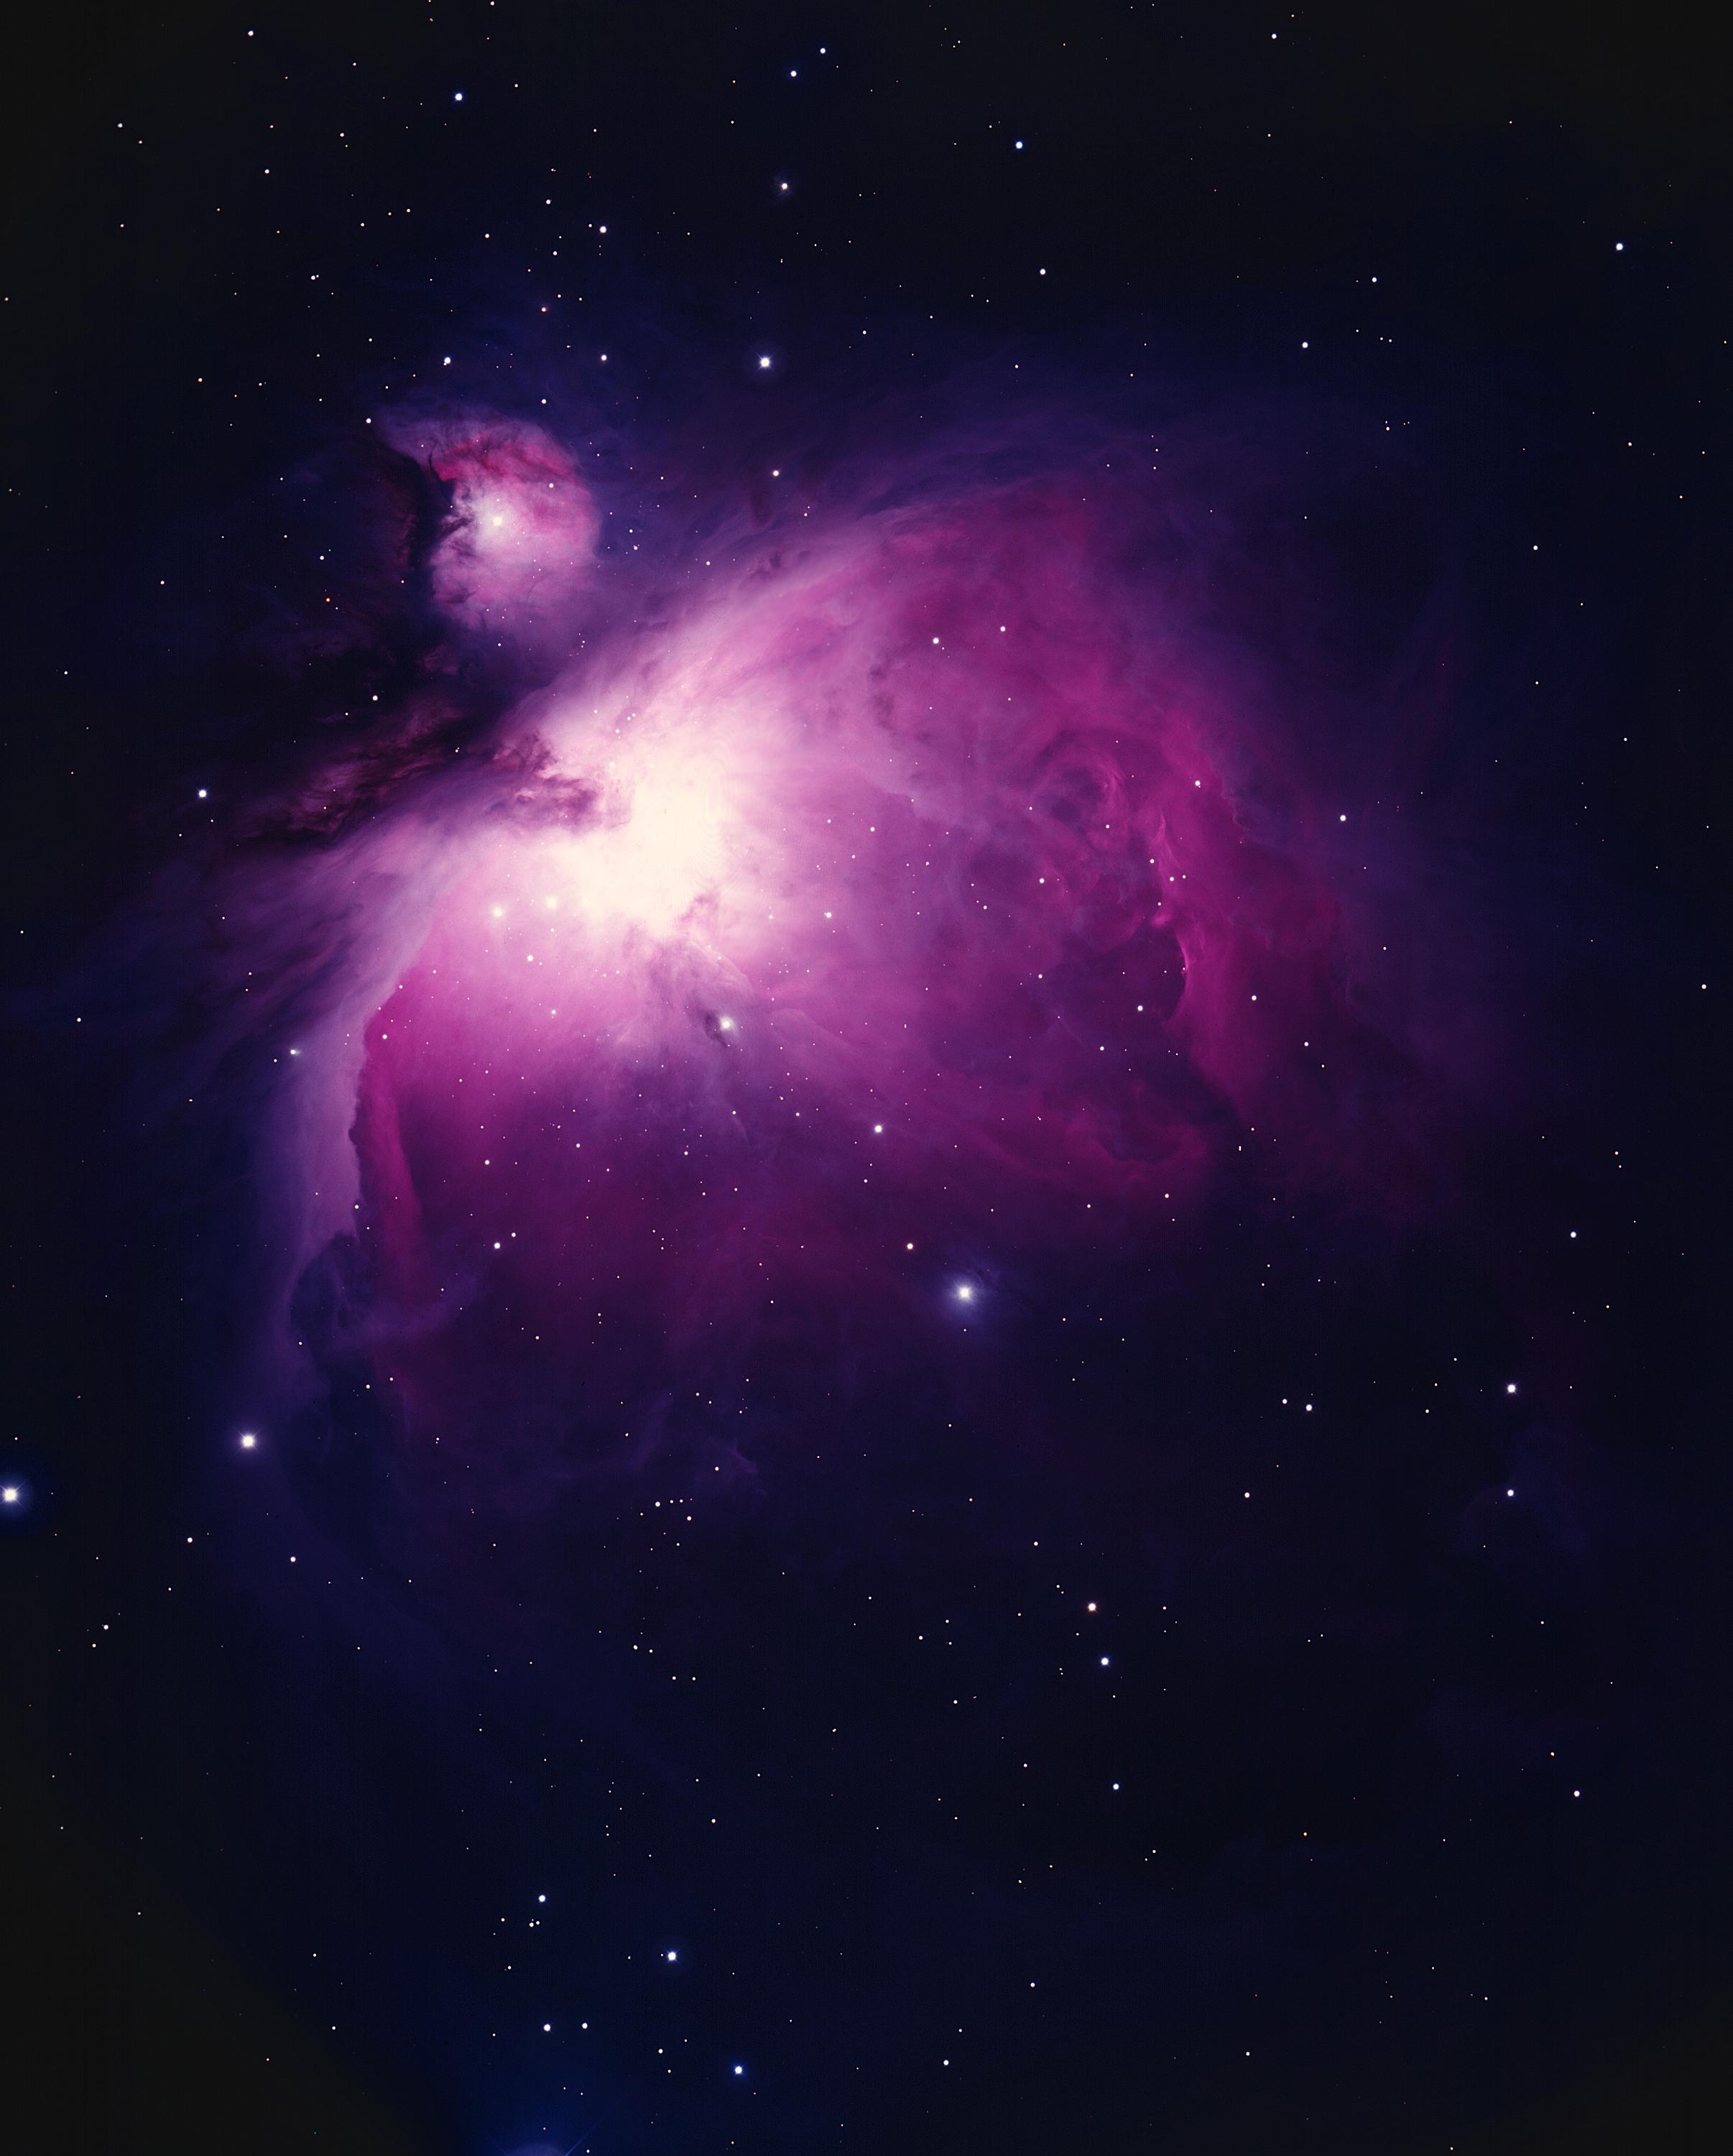 National Optical Astronomy Observatory: M42, Orion